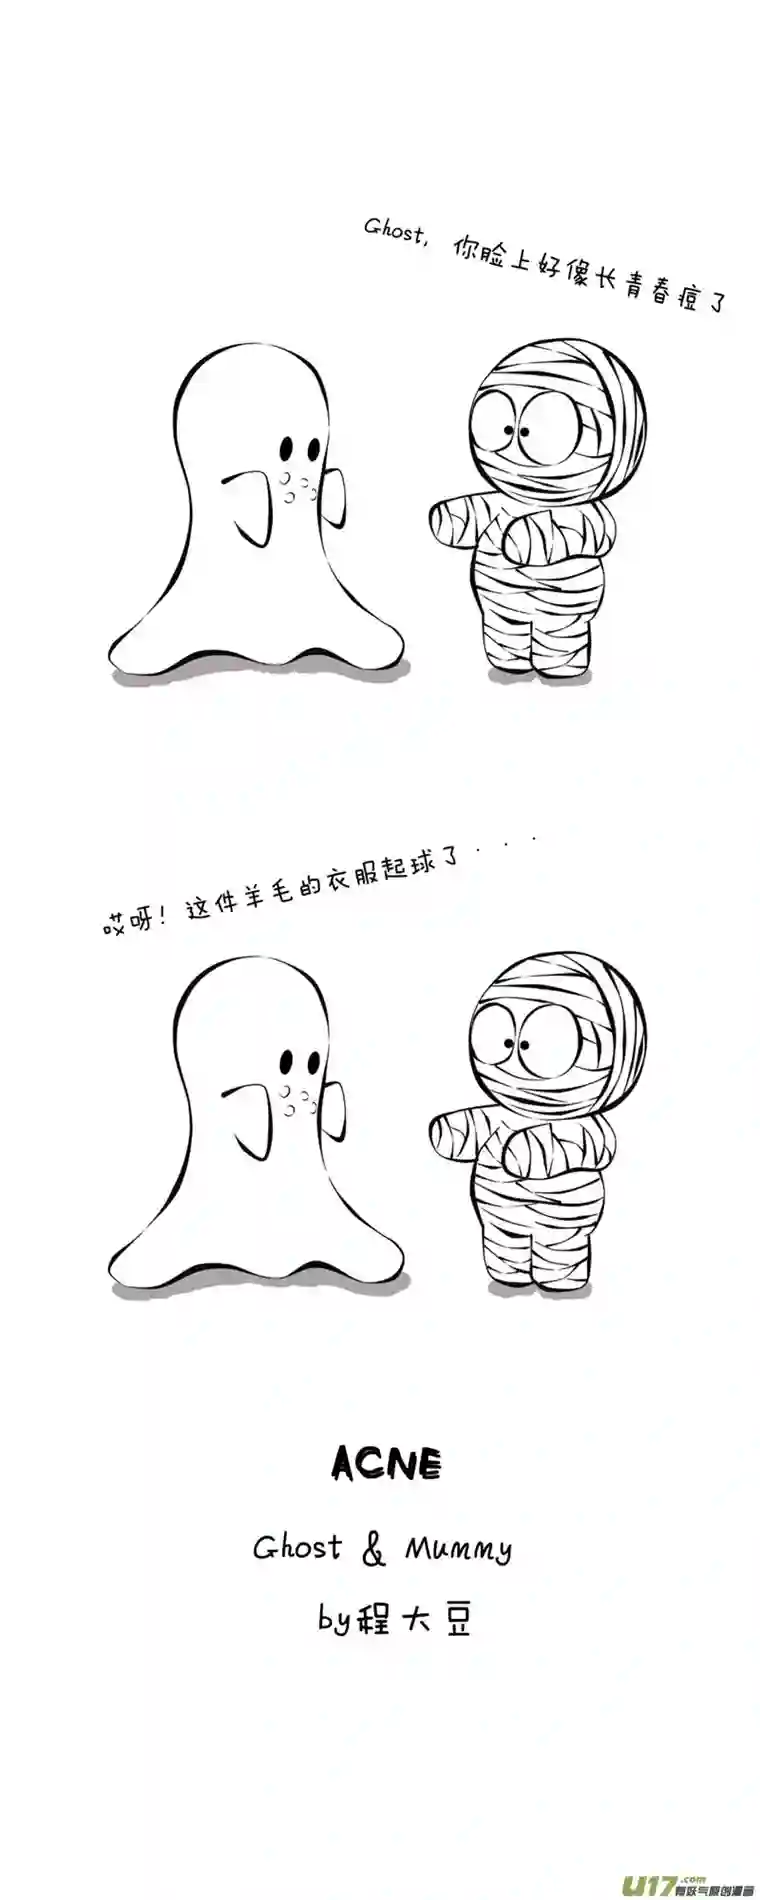 Ghost and MummyCloth-1